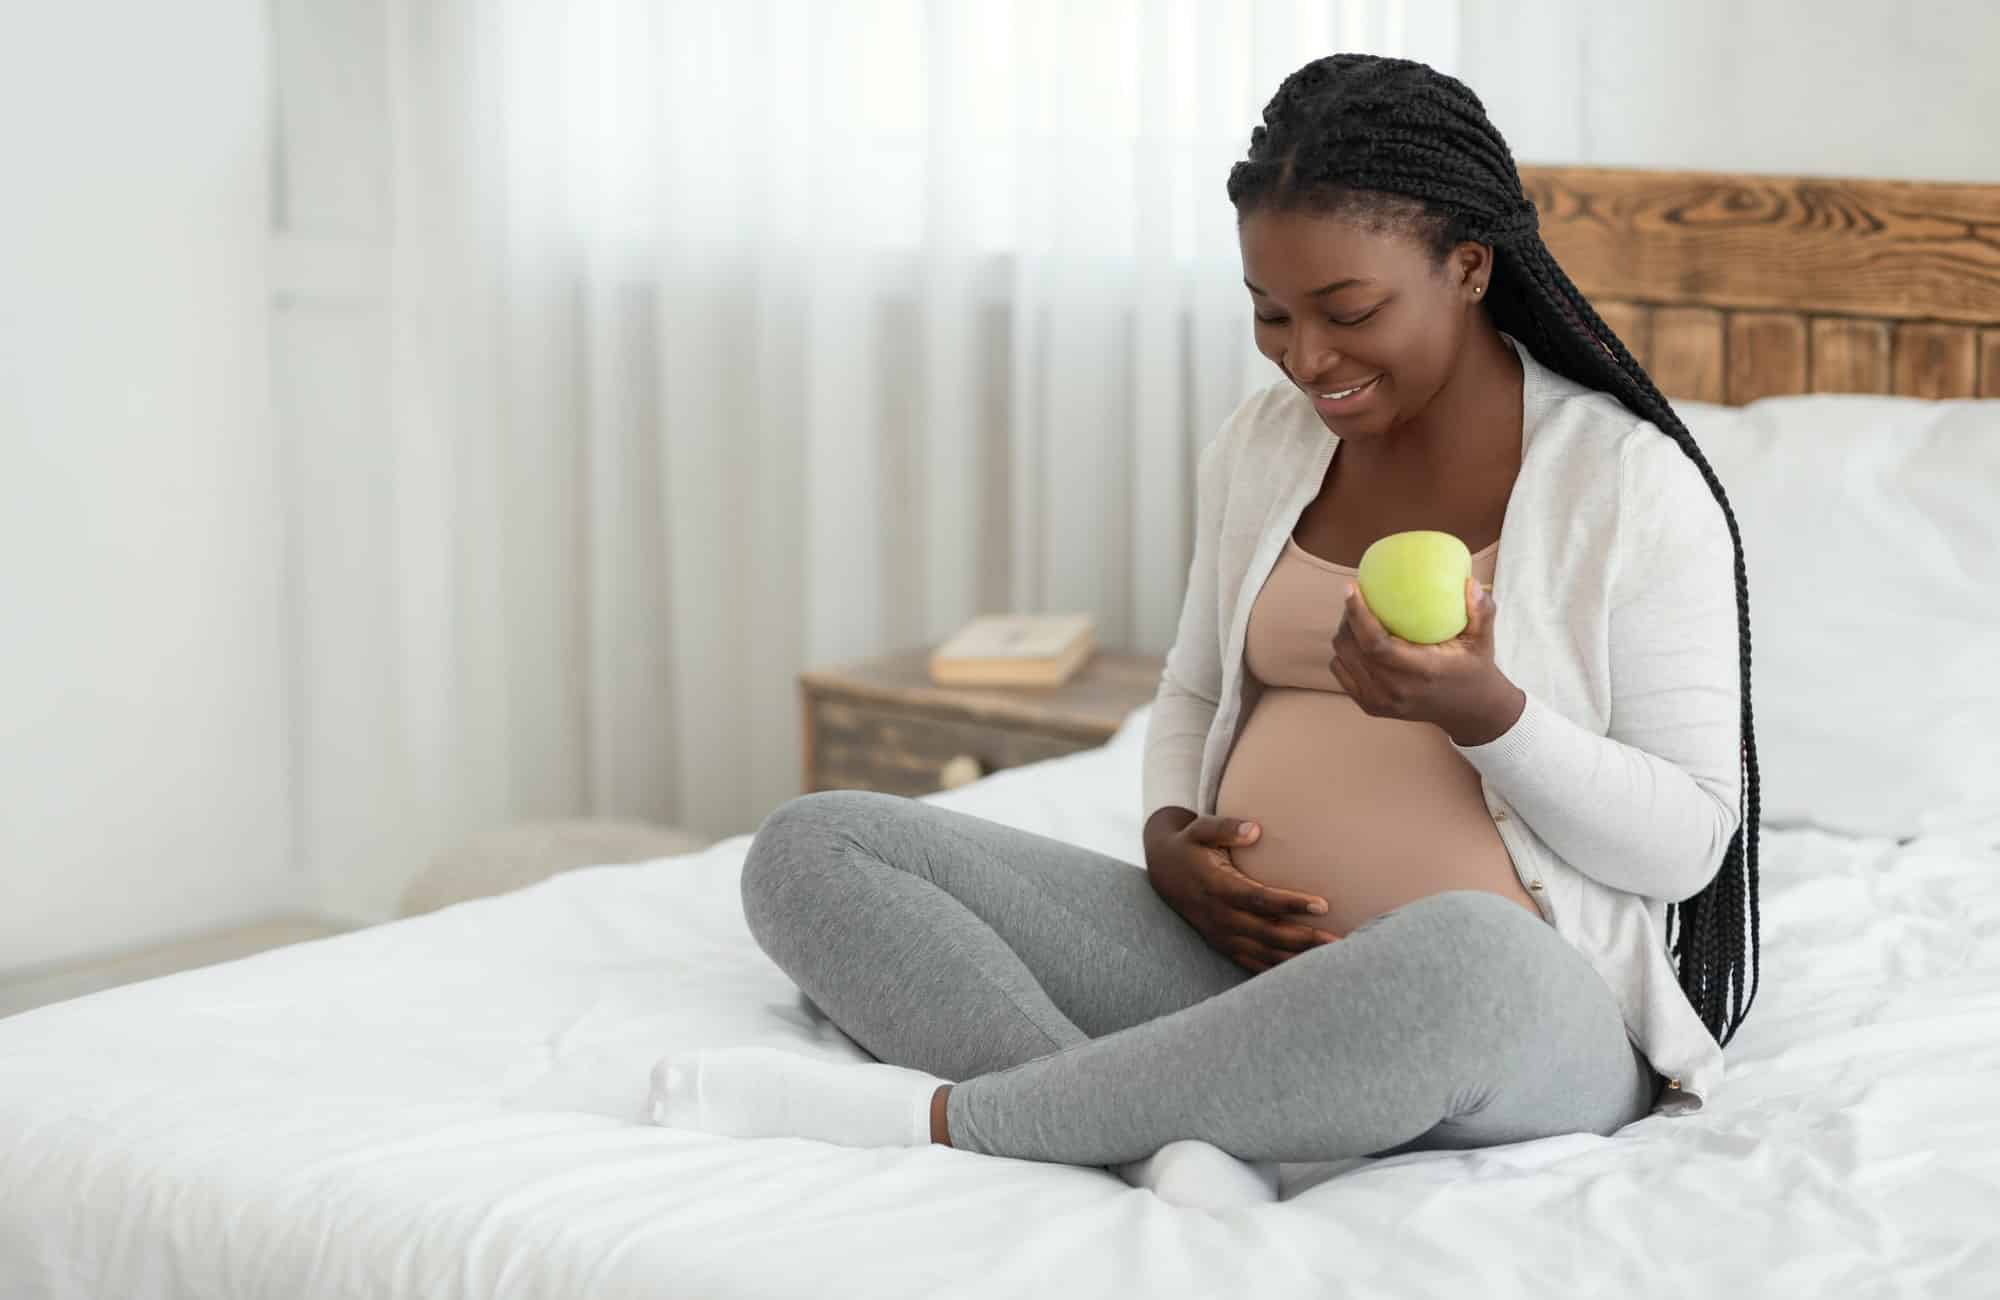 Healthy Pregnancy Diet. Pregnant African Woman Eating Apple While Resting On Bed